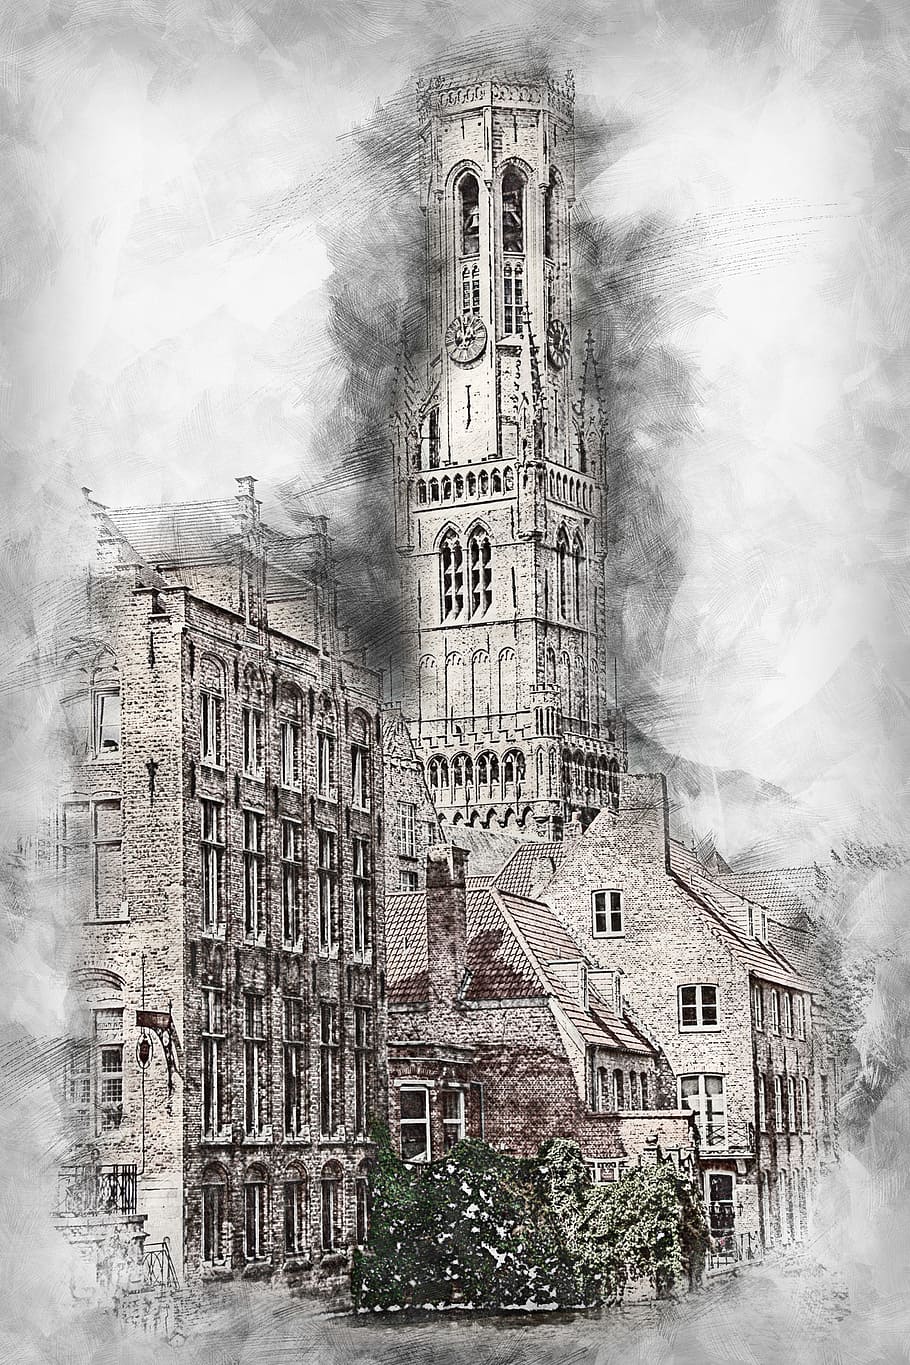 high-rise building sketch, belfry, tower, bruges, canal, channel, romantic, historically, places of interest, old town, idyllic, facades, architecture, medieval city, water, city, river, picturesque, brugge, belgium, structures, waterways, construction art, culture, beautiful, city view, romance, tourism, old, masonry, sky, old buildings, bridge, stone bridge, summer, trees, building, antique, ancient building, middle ages, stone wall, hdr processing, steinweg, the venice of the north, world heritage, unesco, unesco world heritage, 13, century, cultural monument, digital manipulation, photo art, HD wallpaper